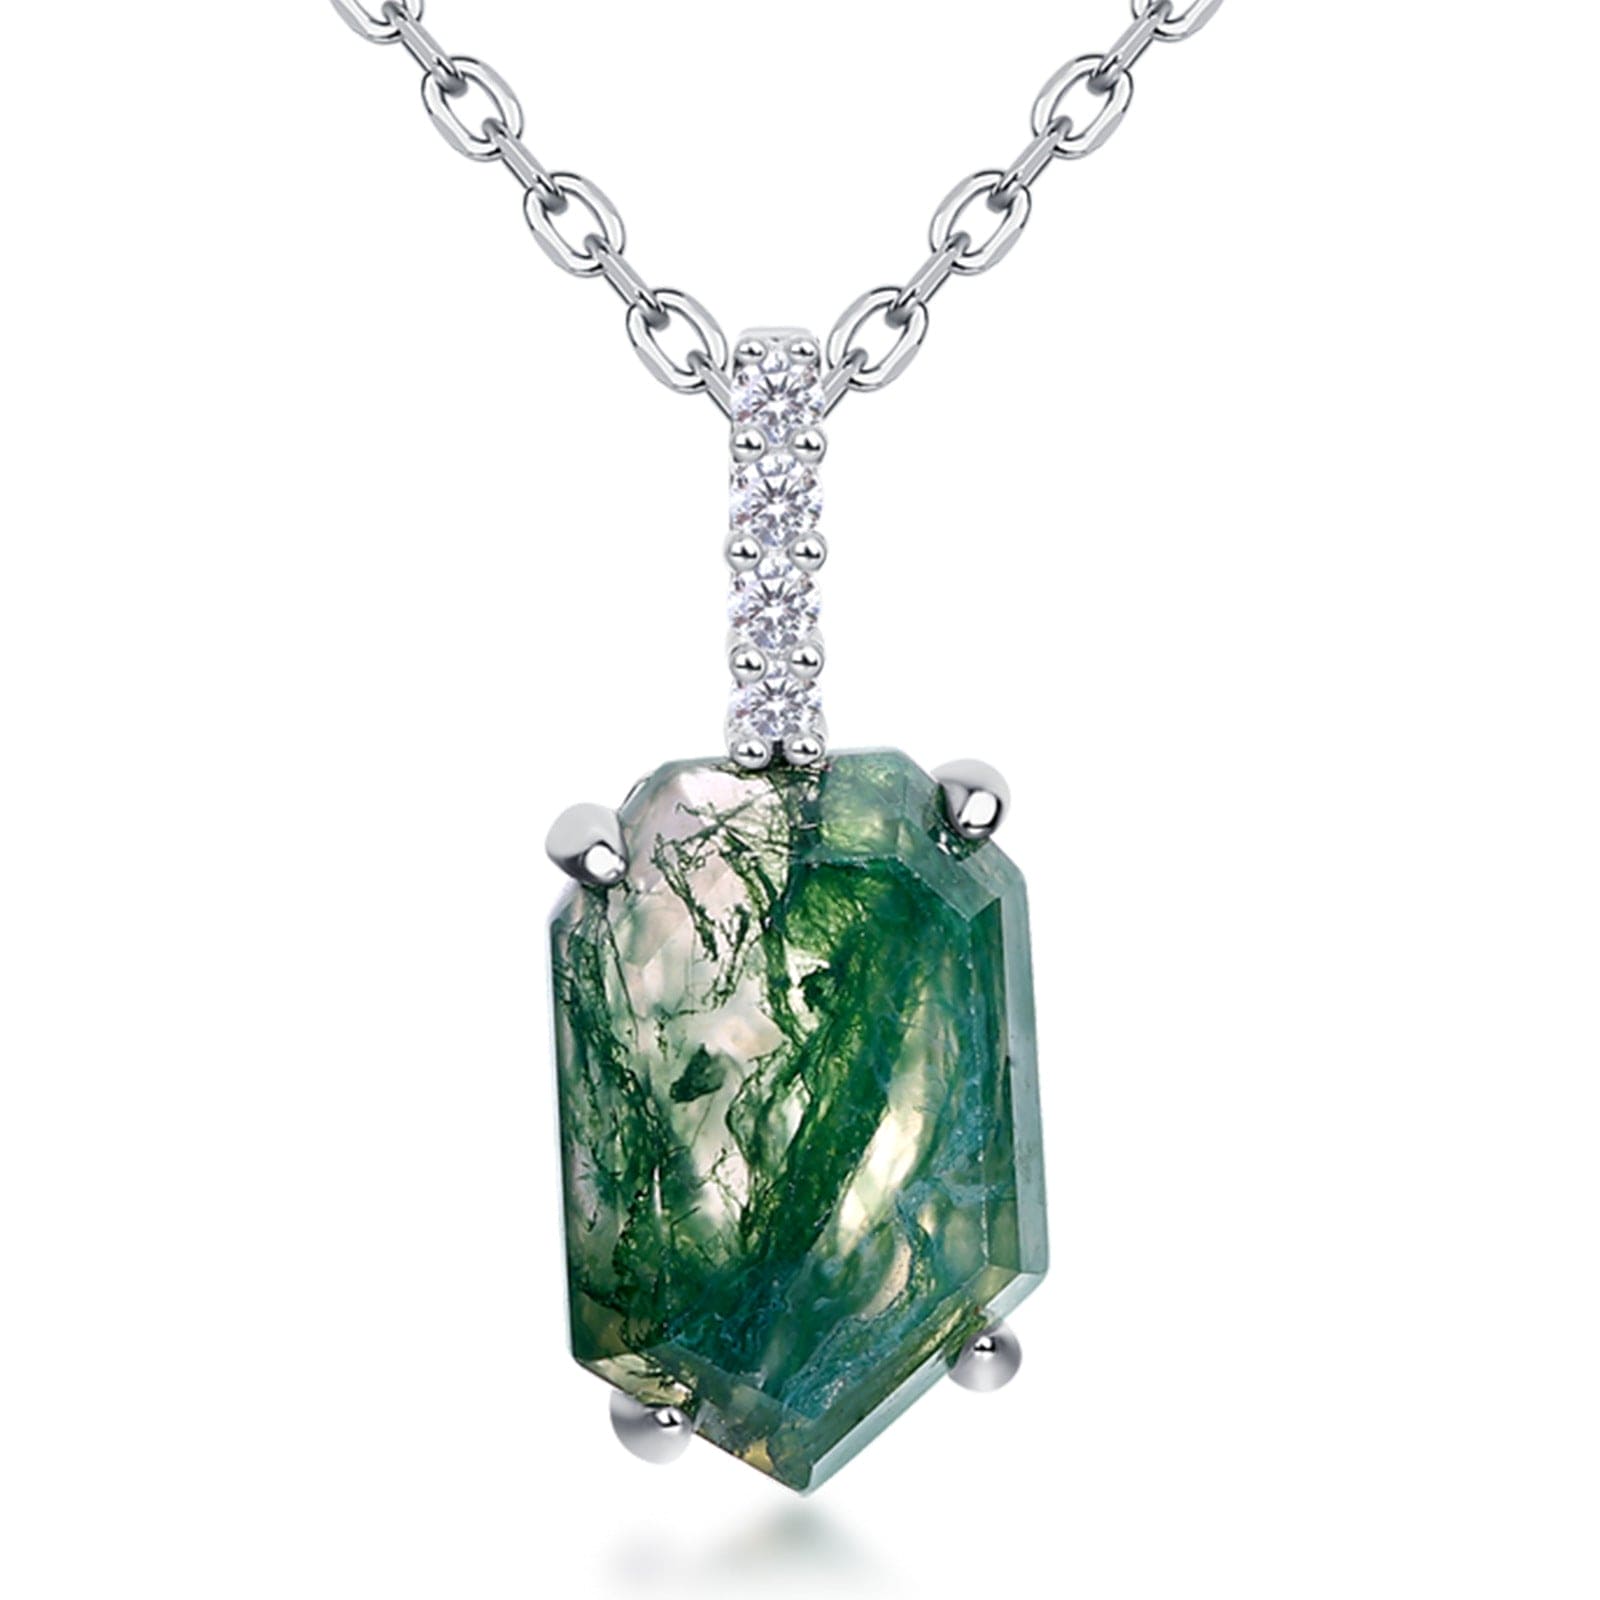 Coffin Cut Natural Moss Agate Column Pendant Necklace - S925 Sterling Silver